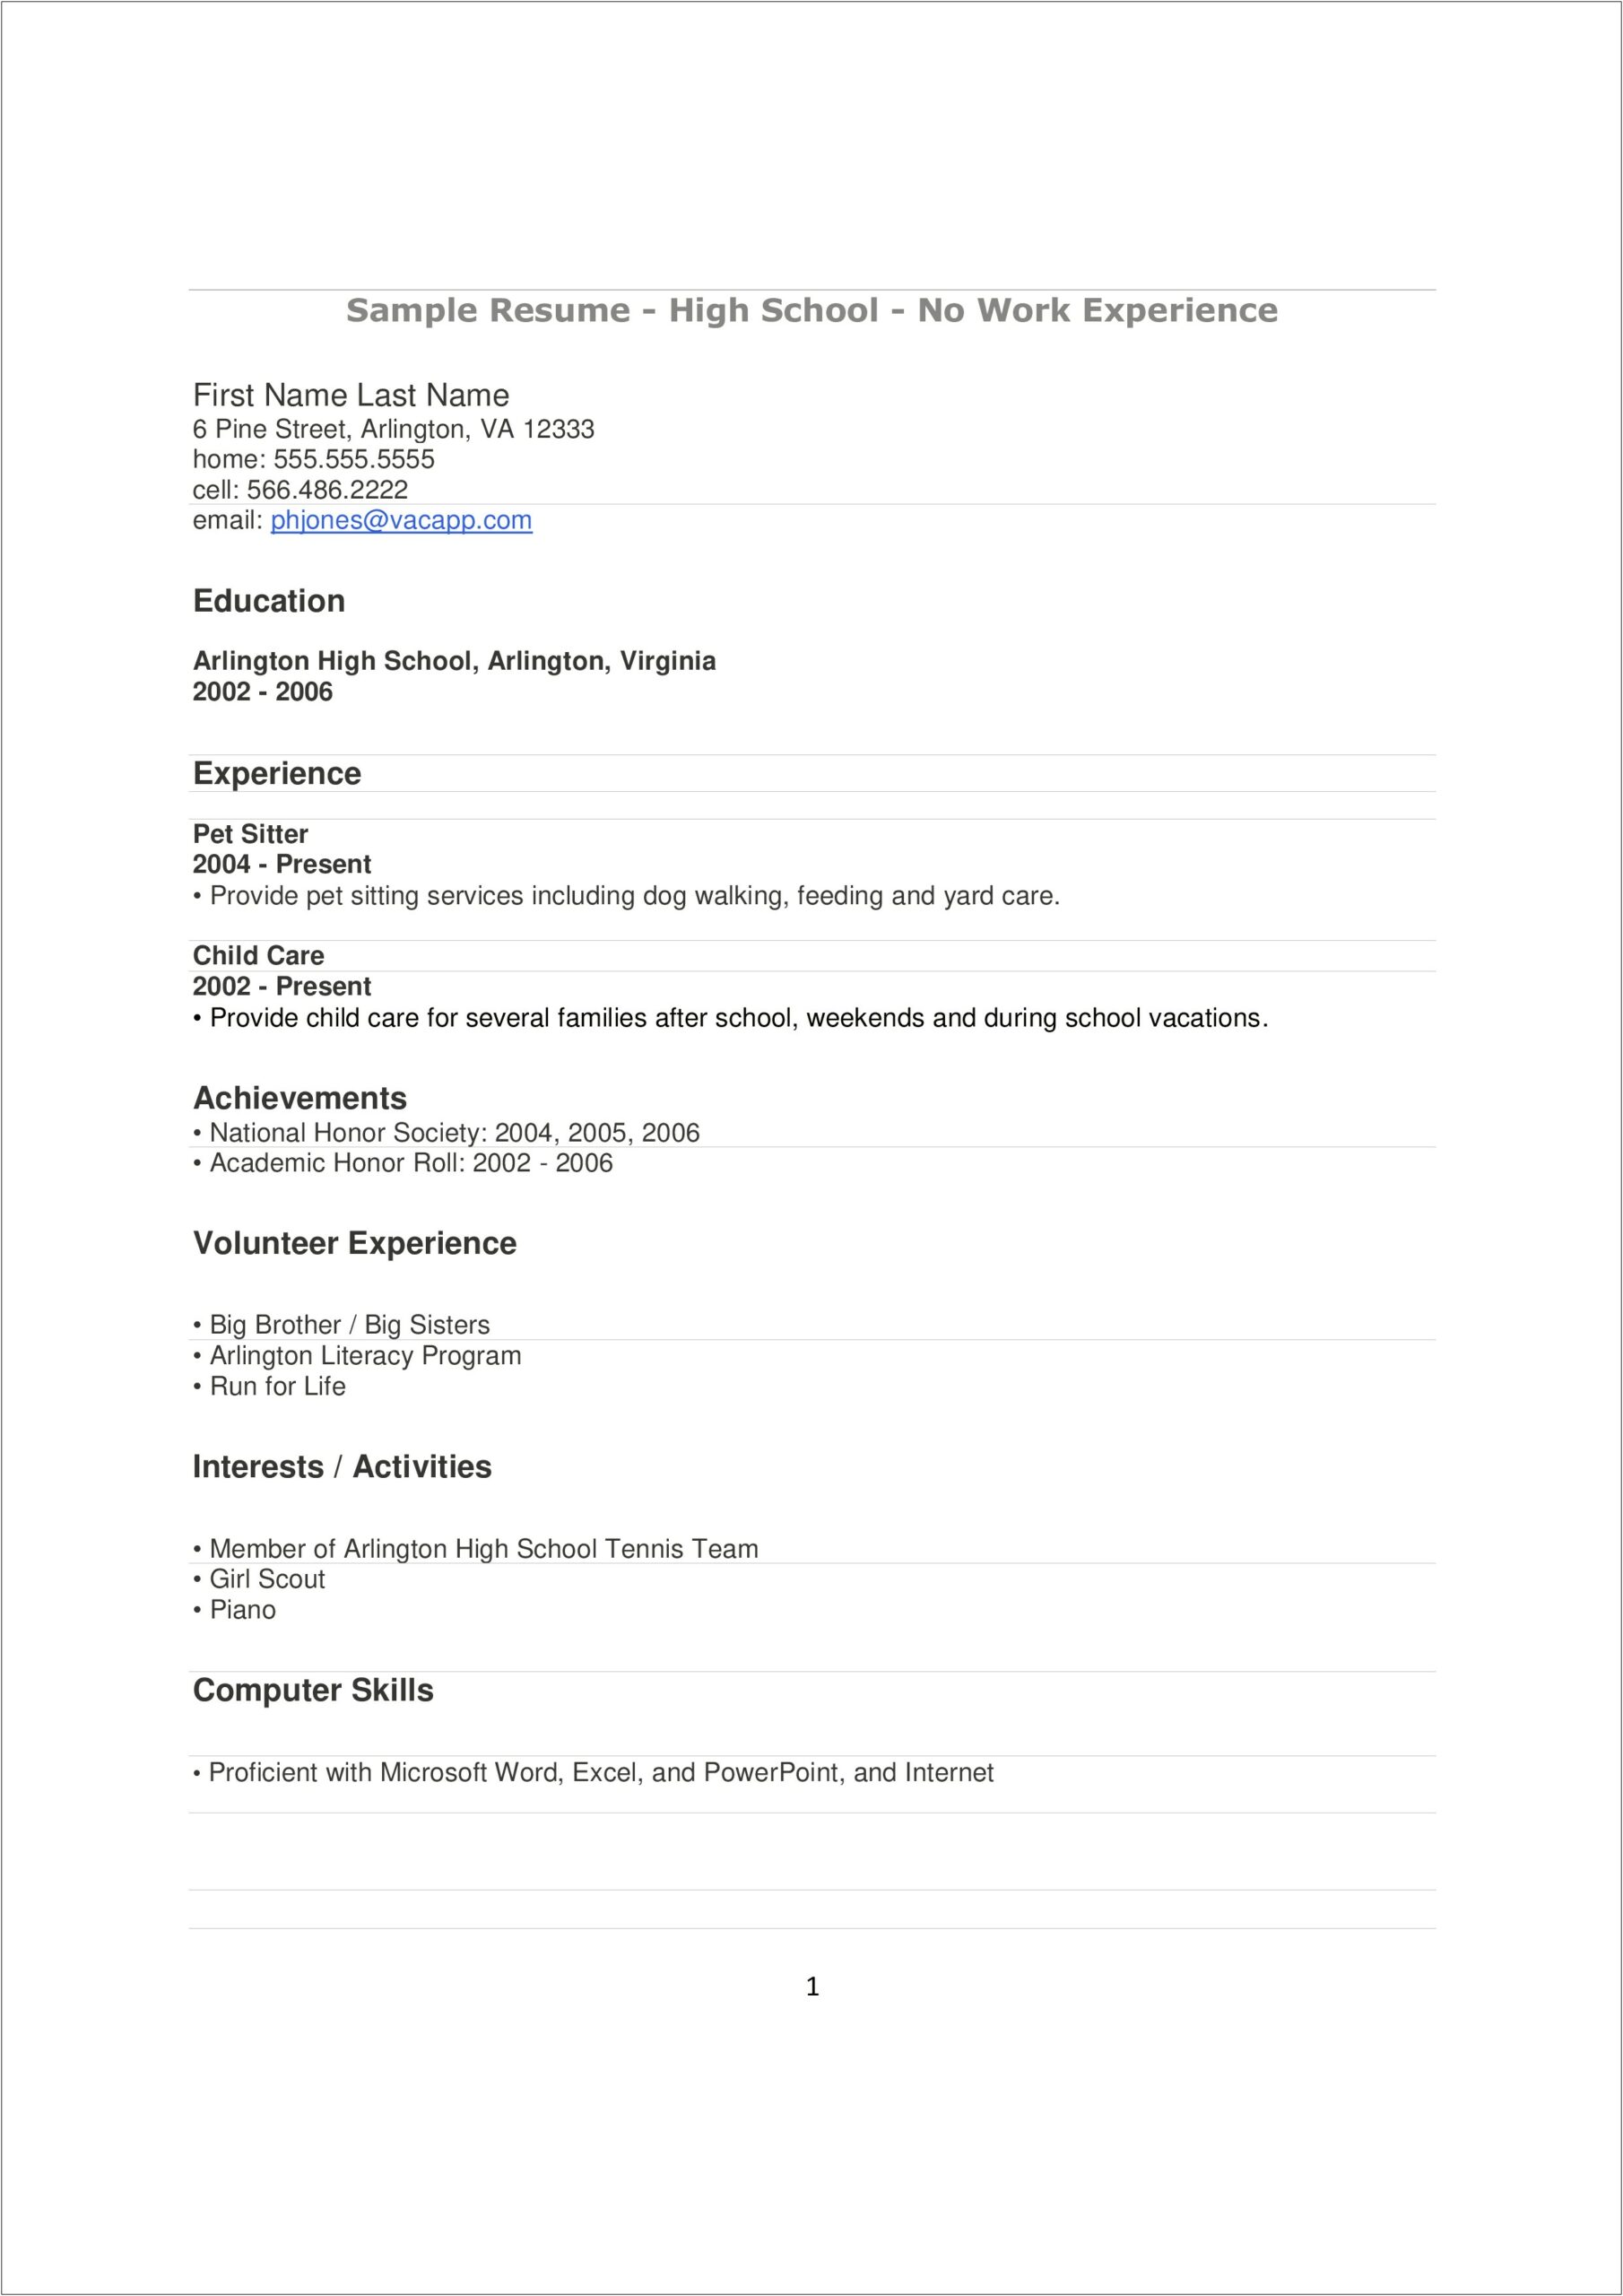 Resume Examples With No Jobs